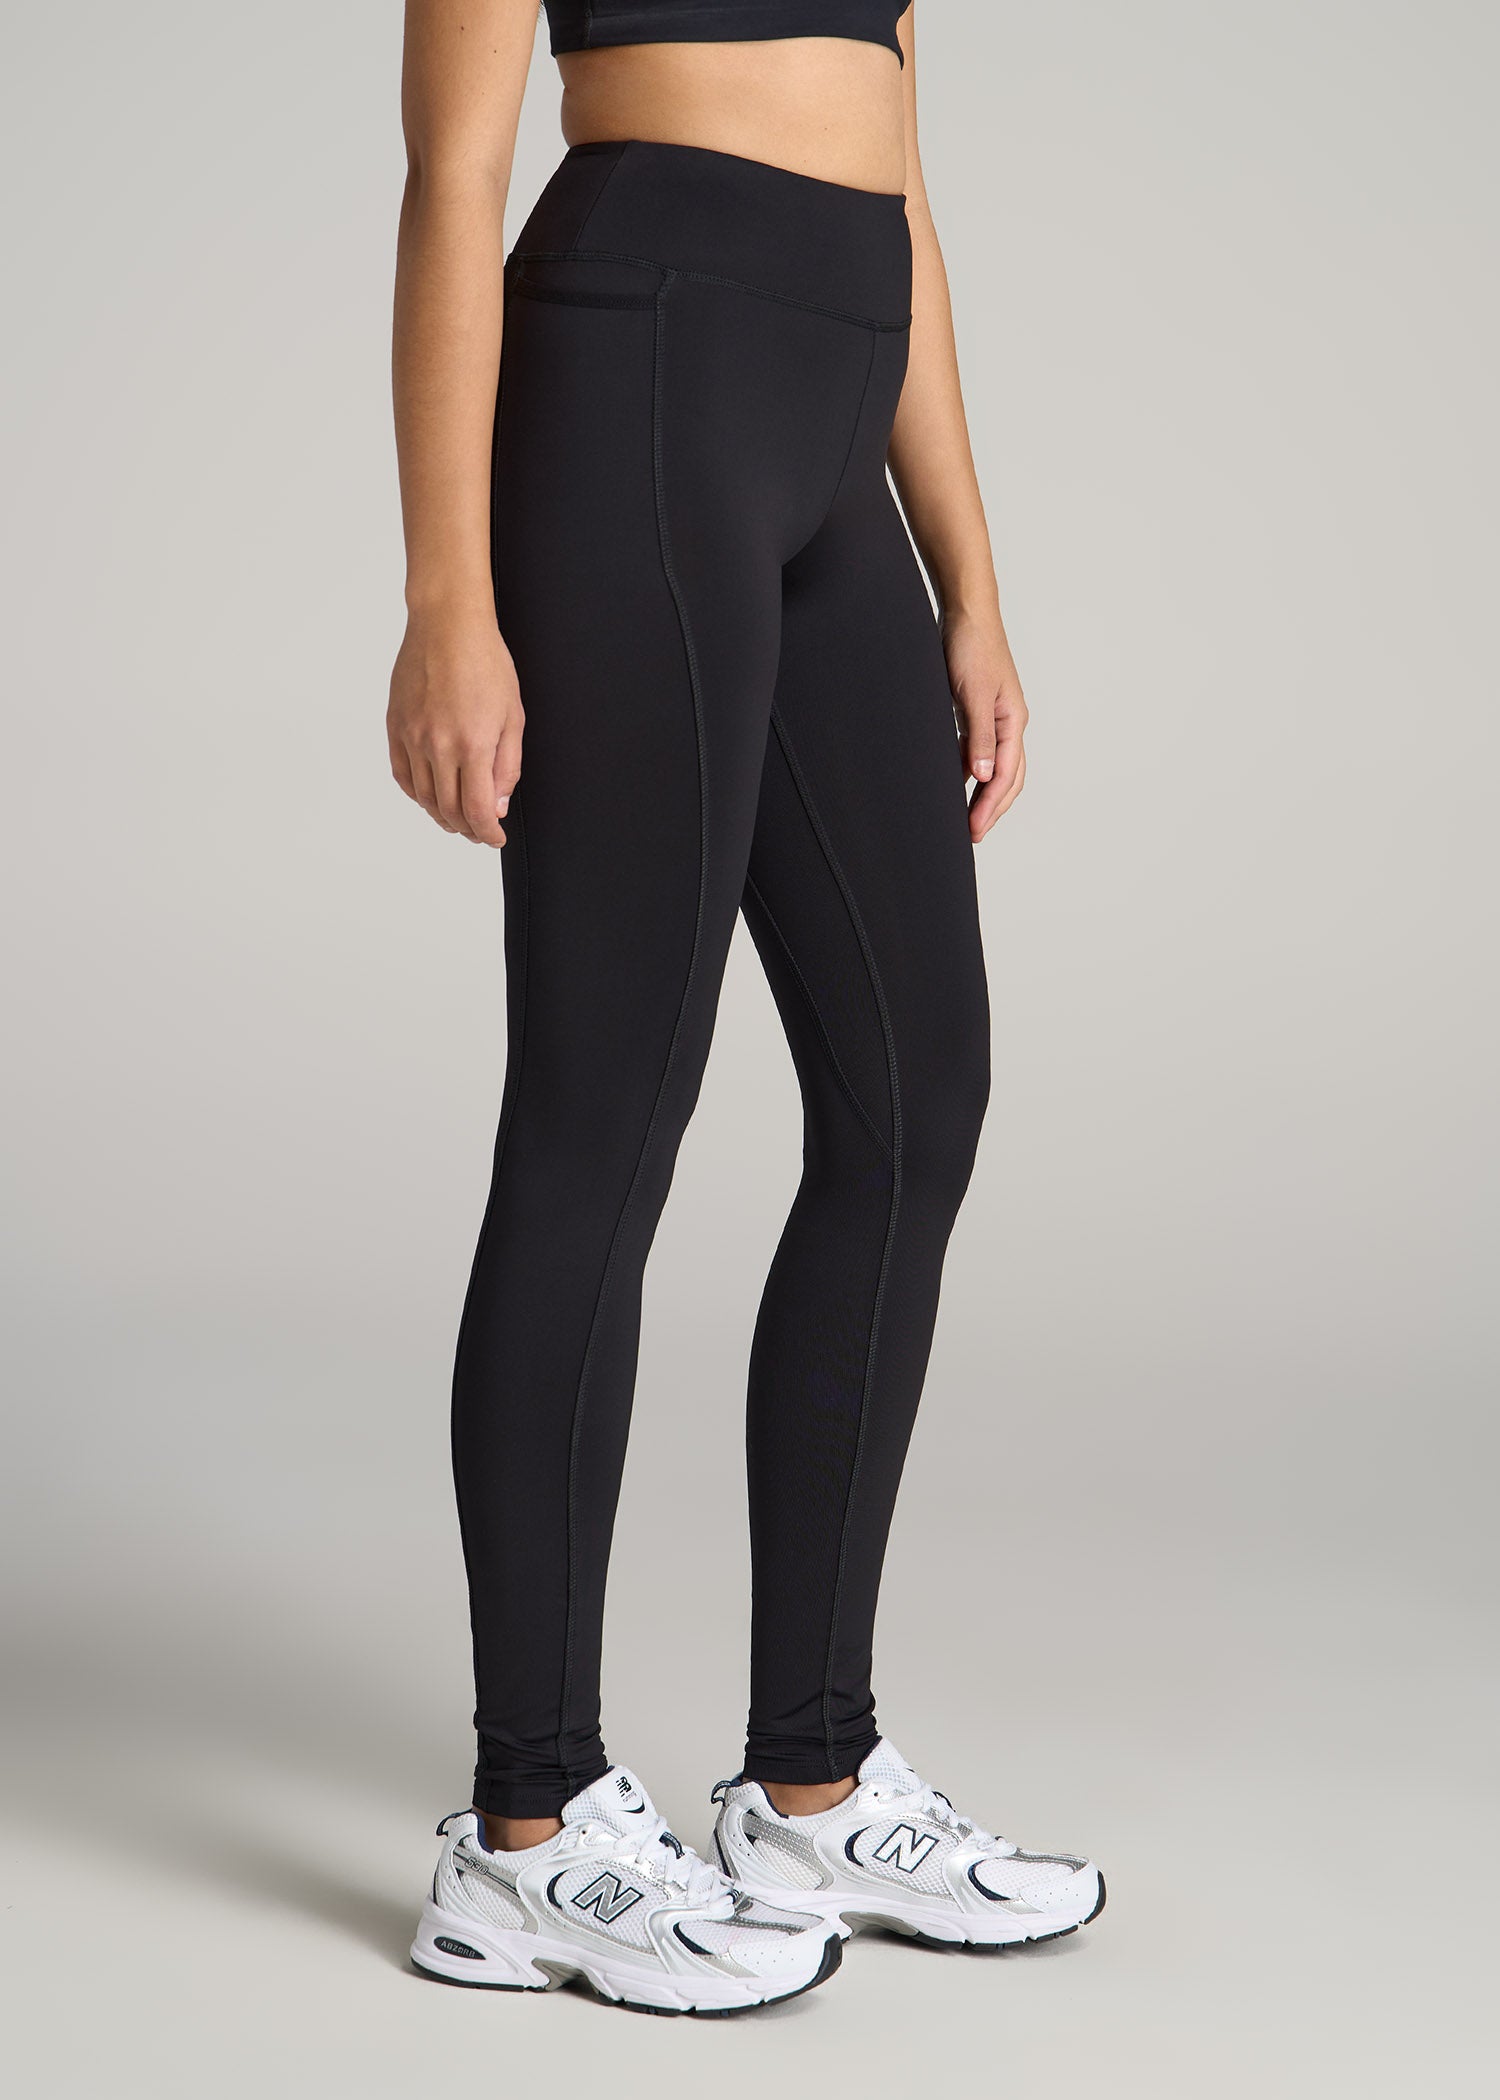 Black Extra Long Leggings with a Pattern